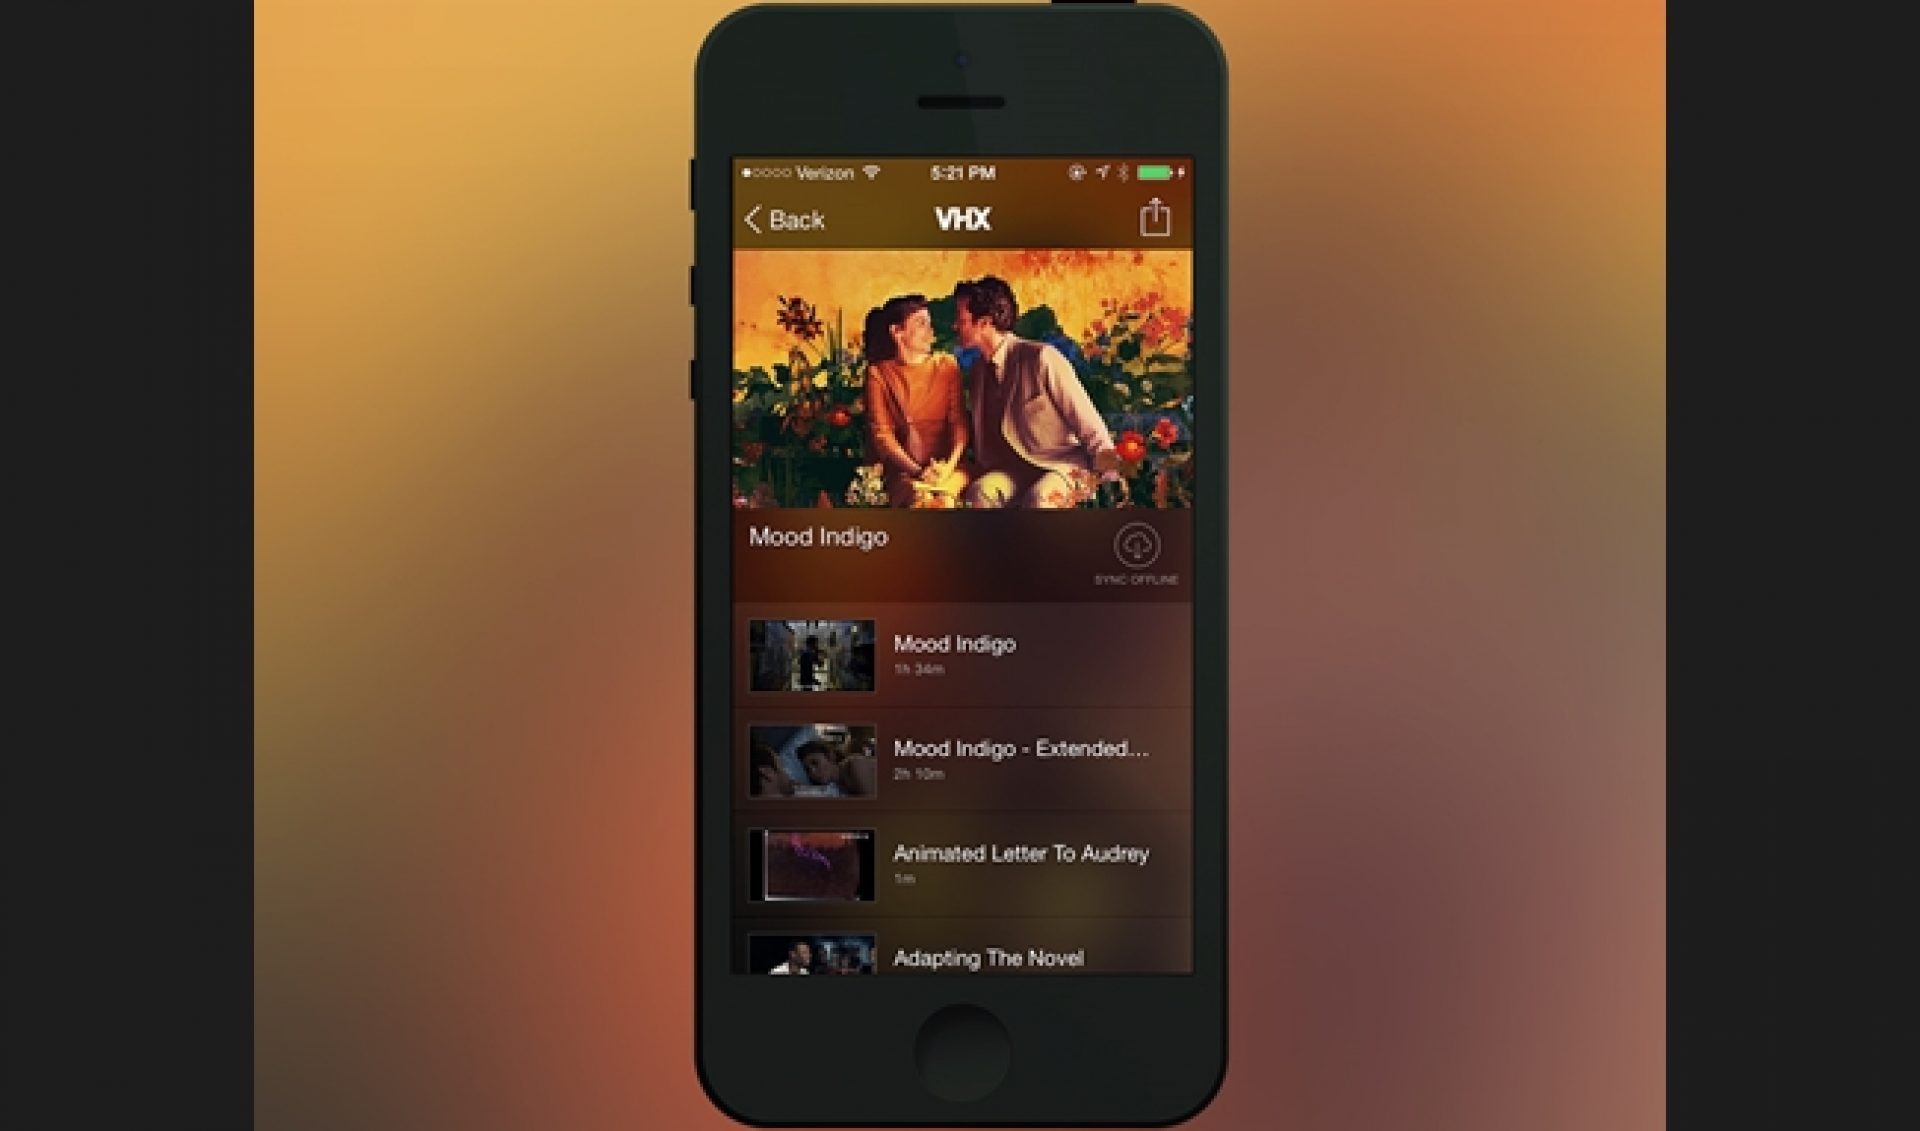 VHX Puts All Its Content In One Place, Offers ‘Star Wars Uncut’ For Free